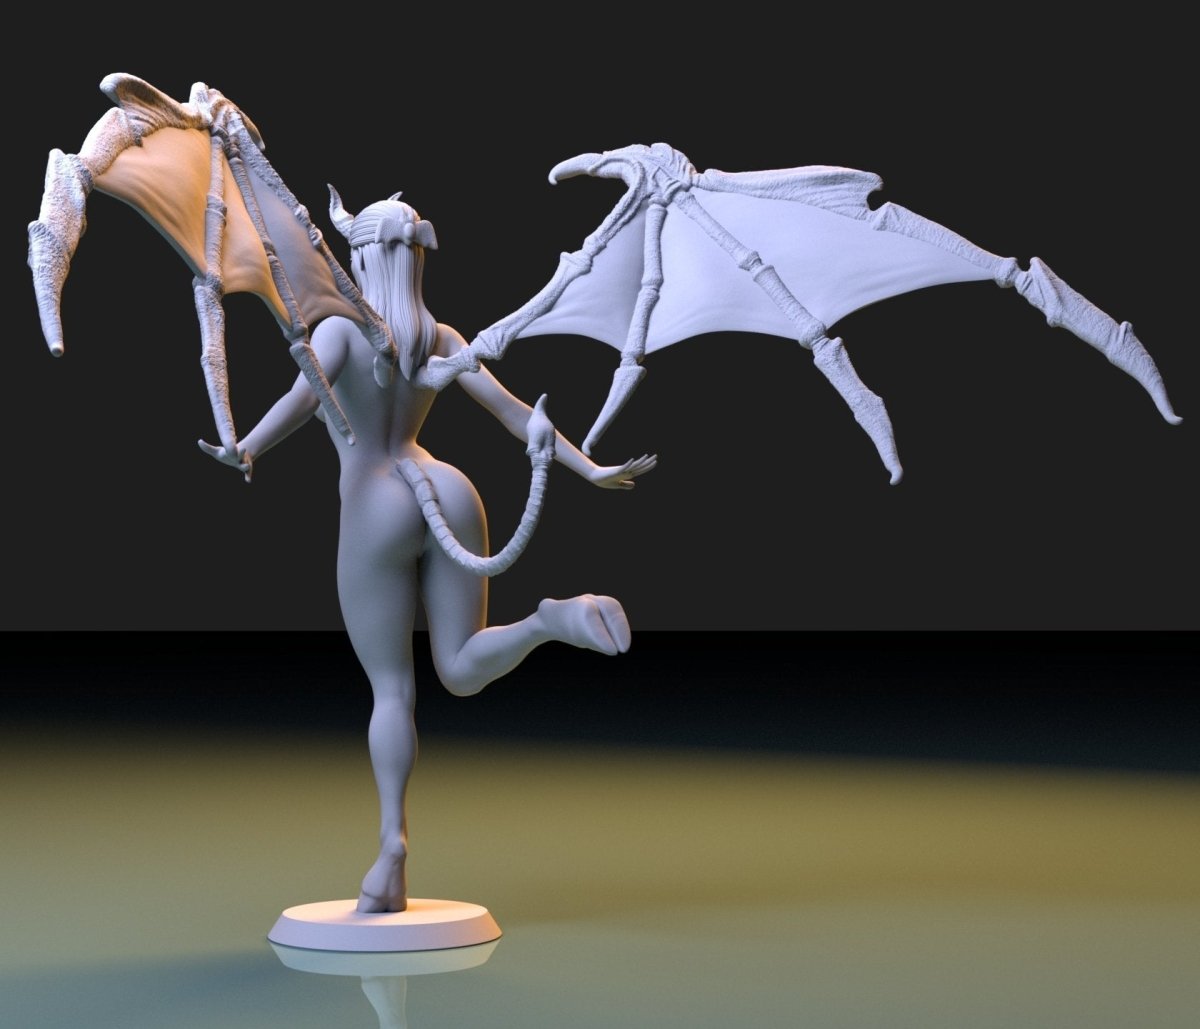 NSFW Resin Miniature Succubus 4 NSFW 3D Printed Figurine Fanart Unpainted Miniature Collectibles